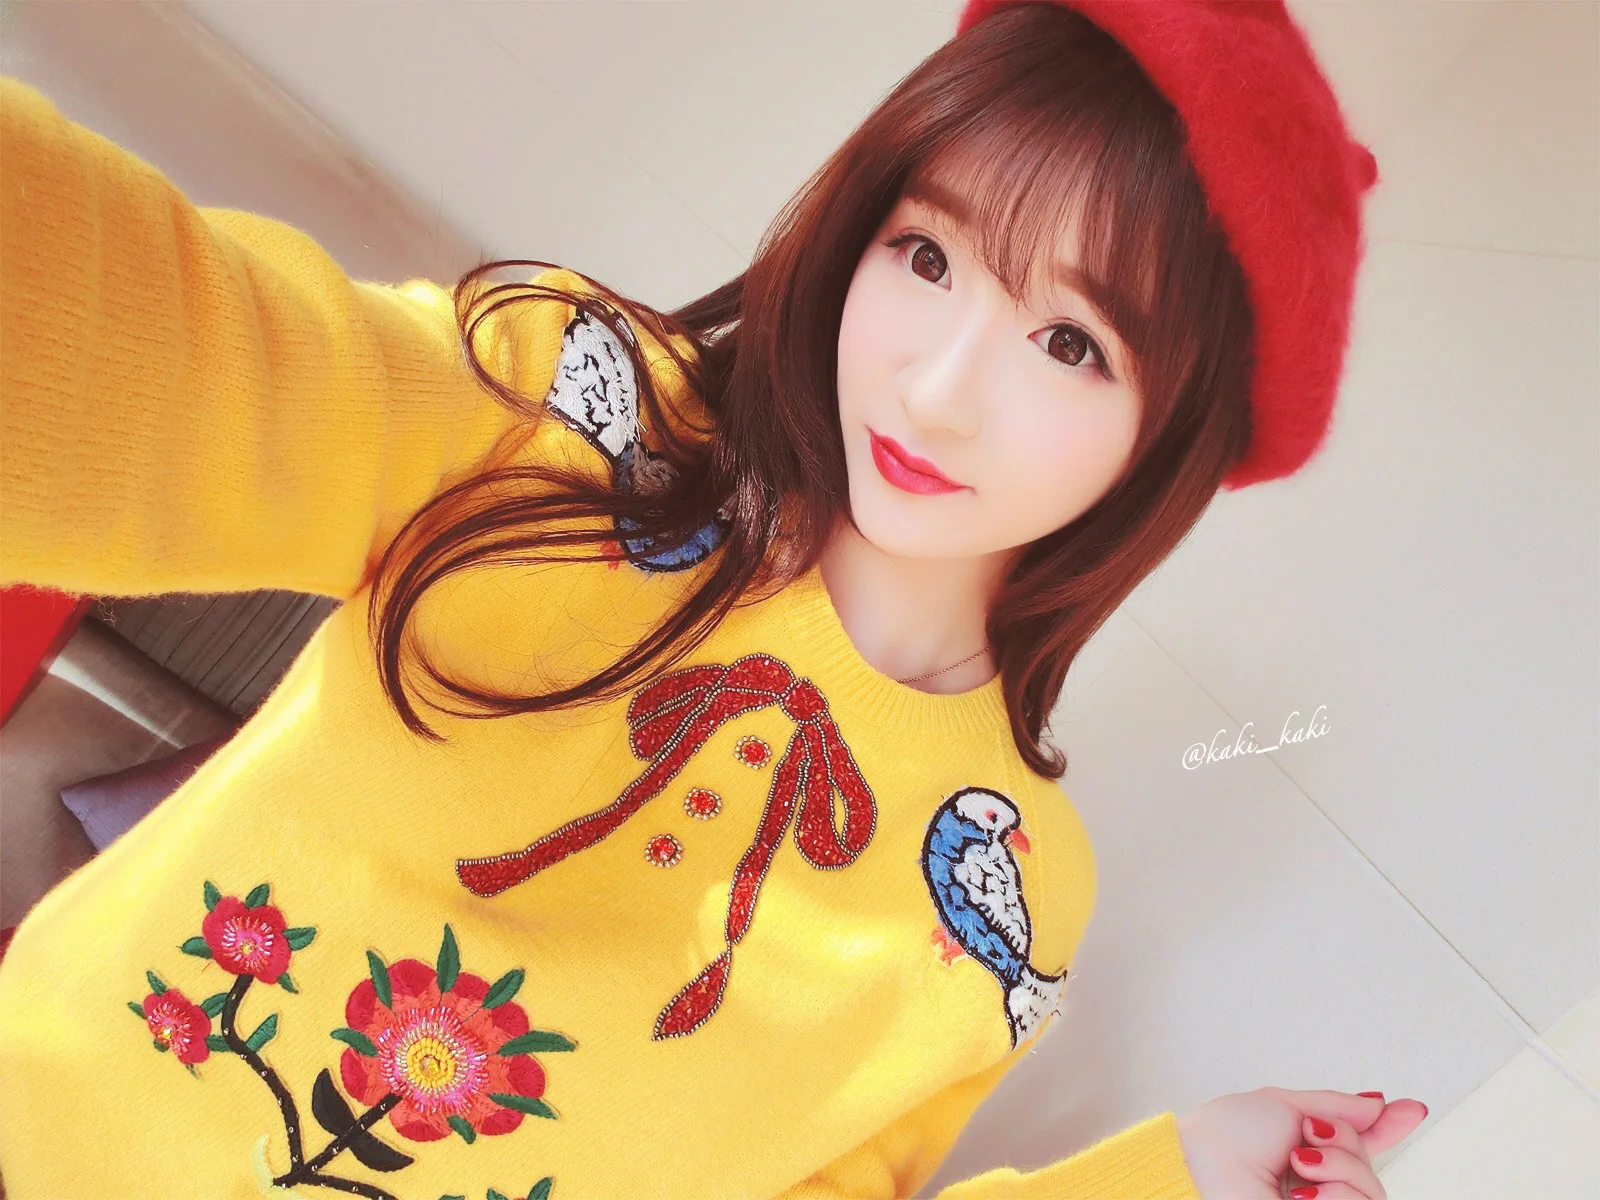 Women Embroidery Yellow Sweater Bird Floral Embroidered Beading Bowknot O-neck Pullovers High Quality Autumn Winter Knit Sweater